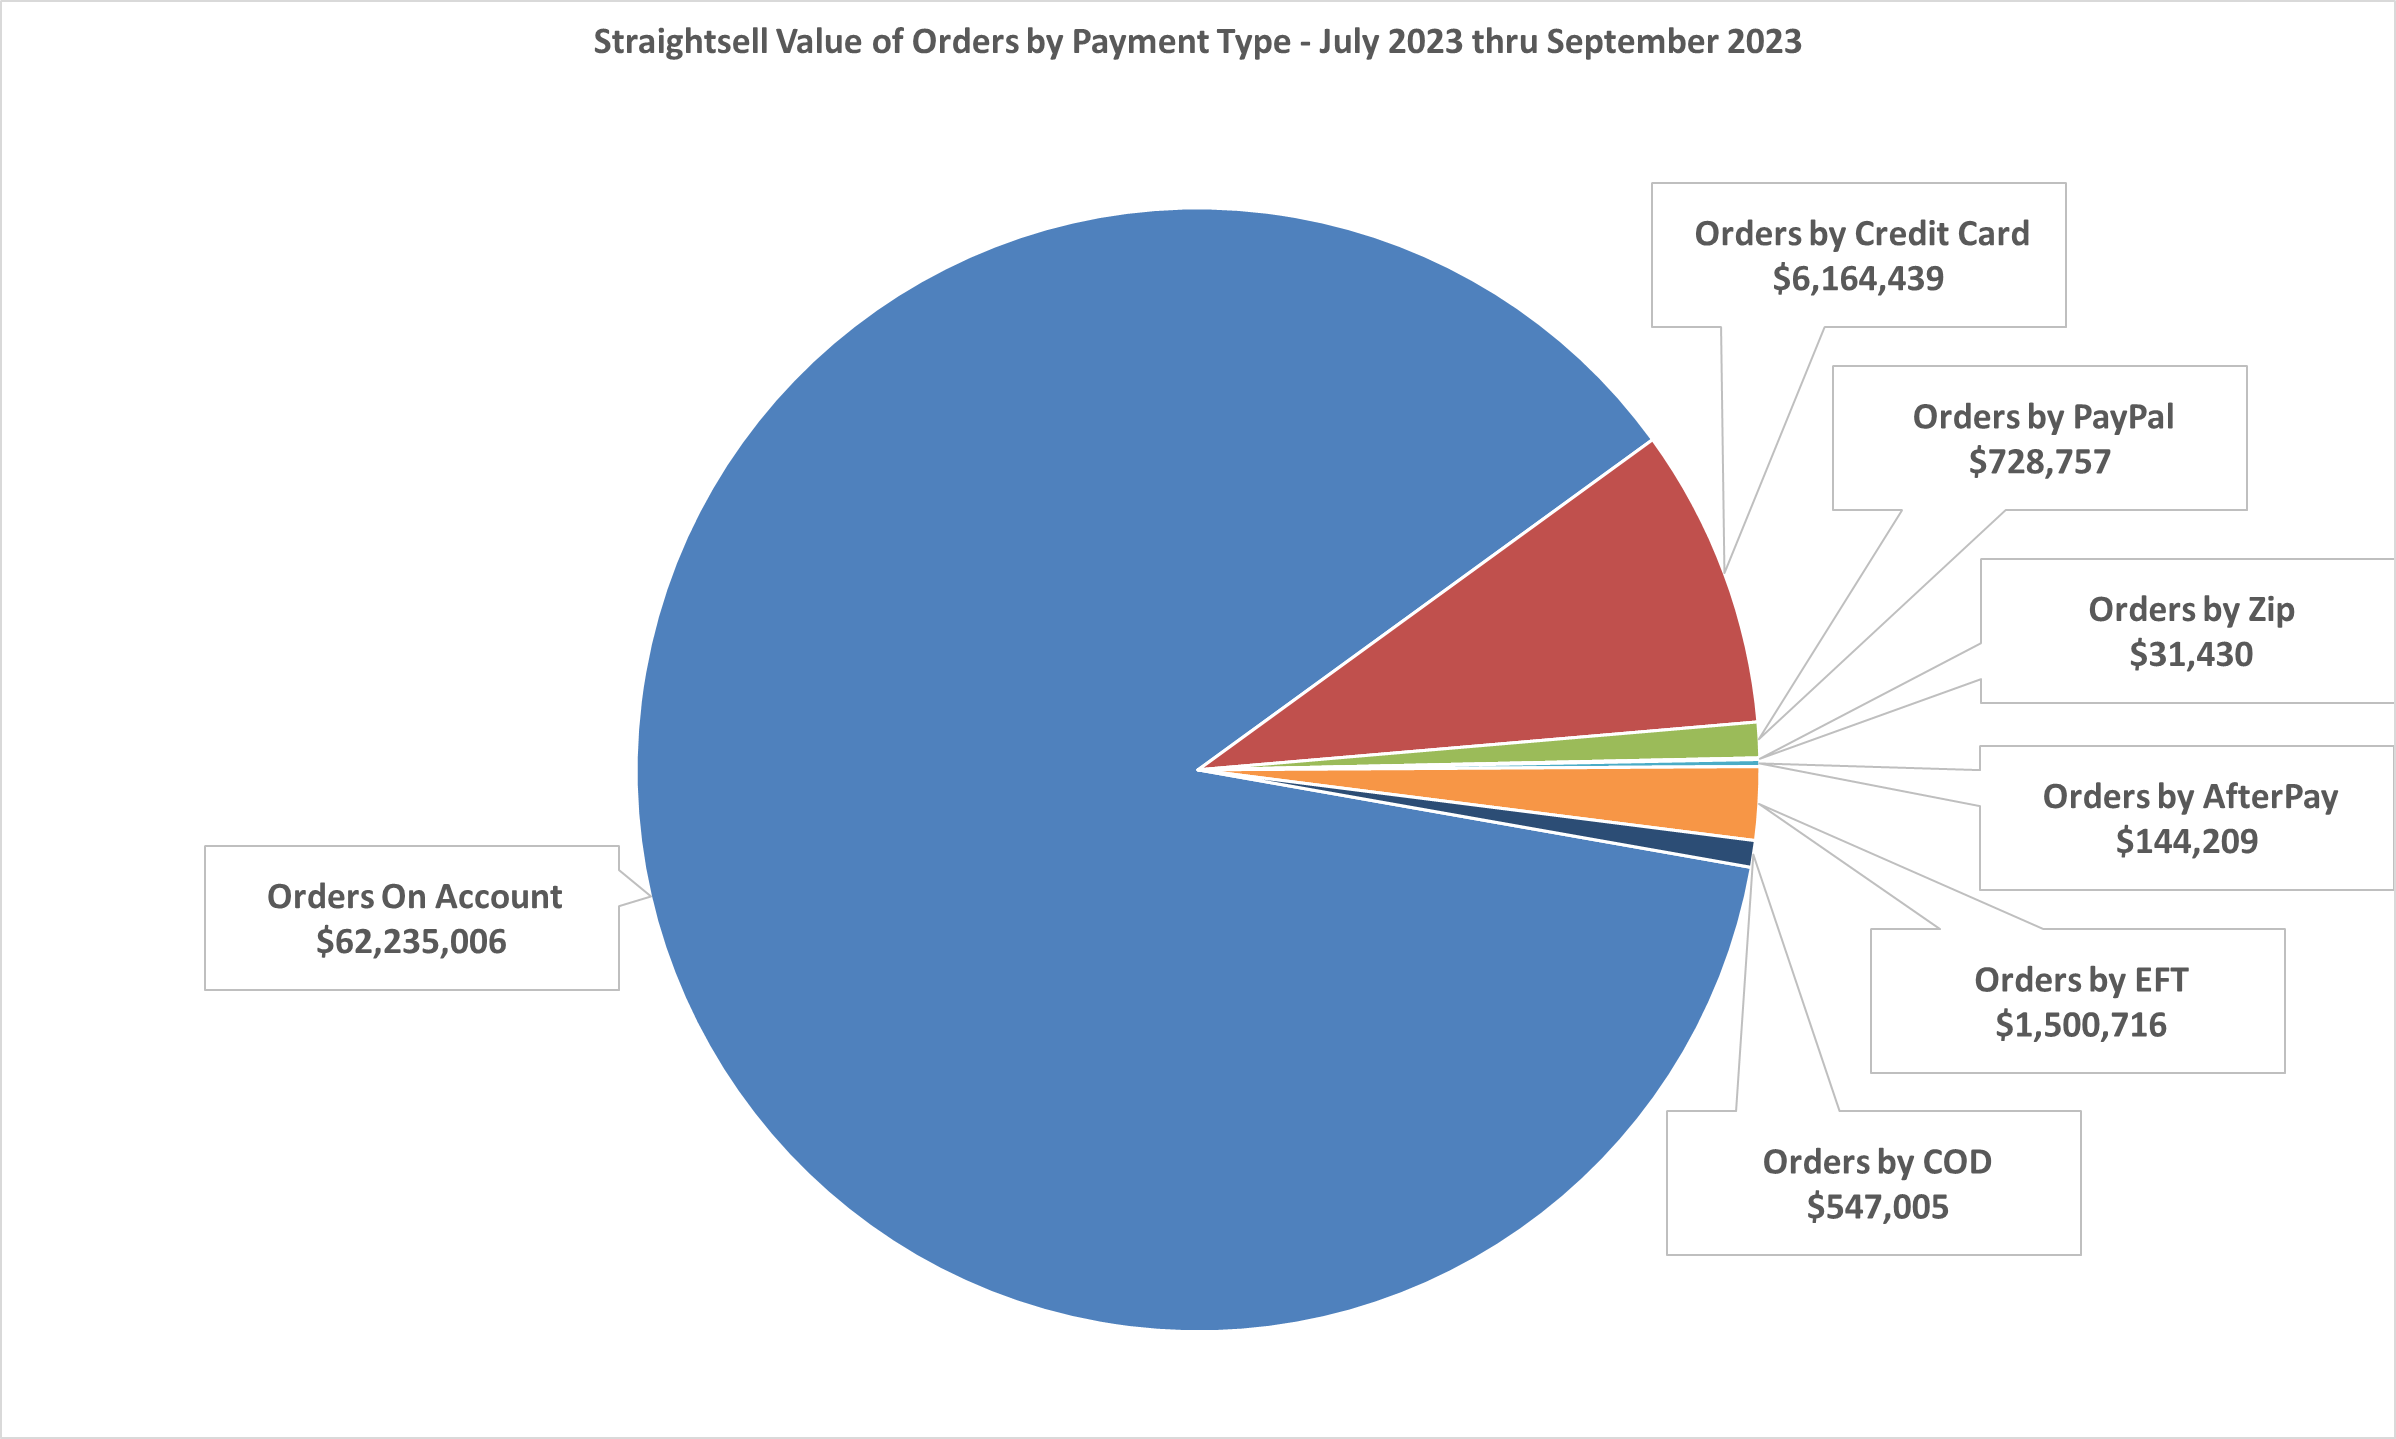 Straightsell Value of Orders by Payment Type - July 2023 thru September 2023